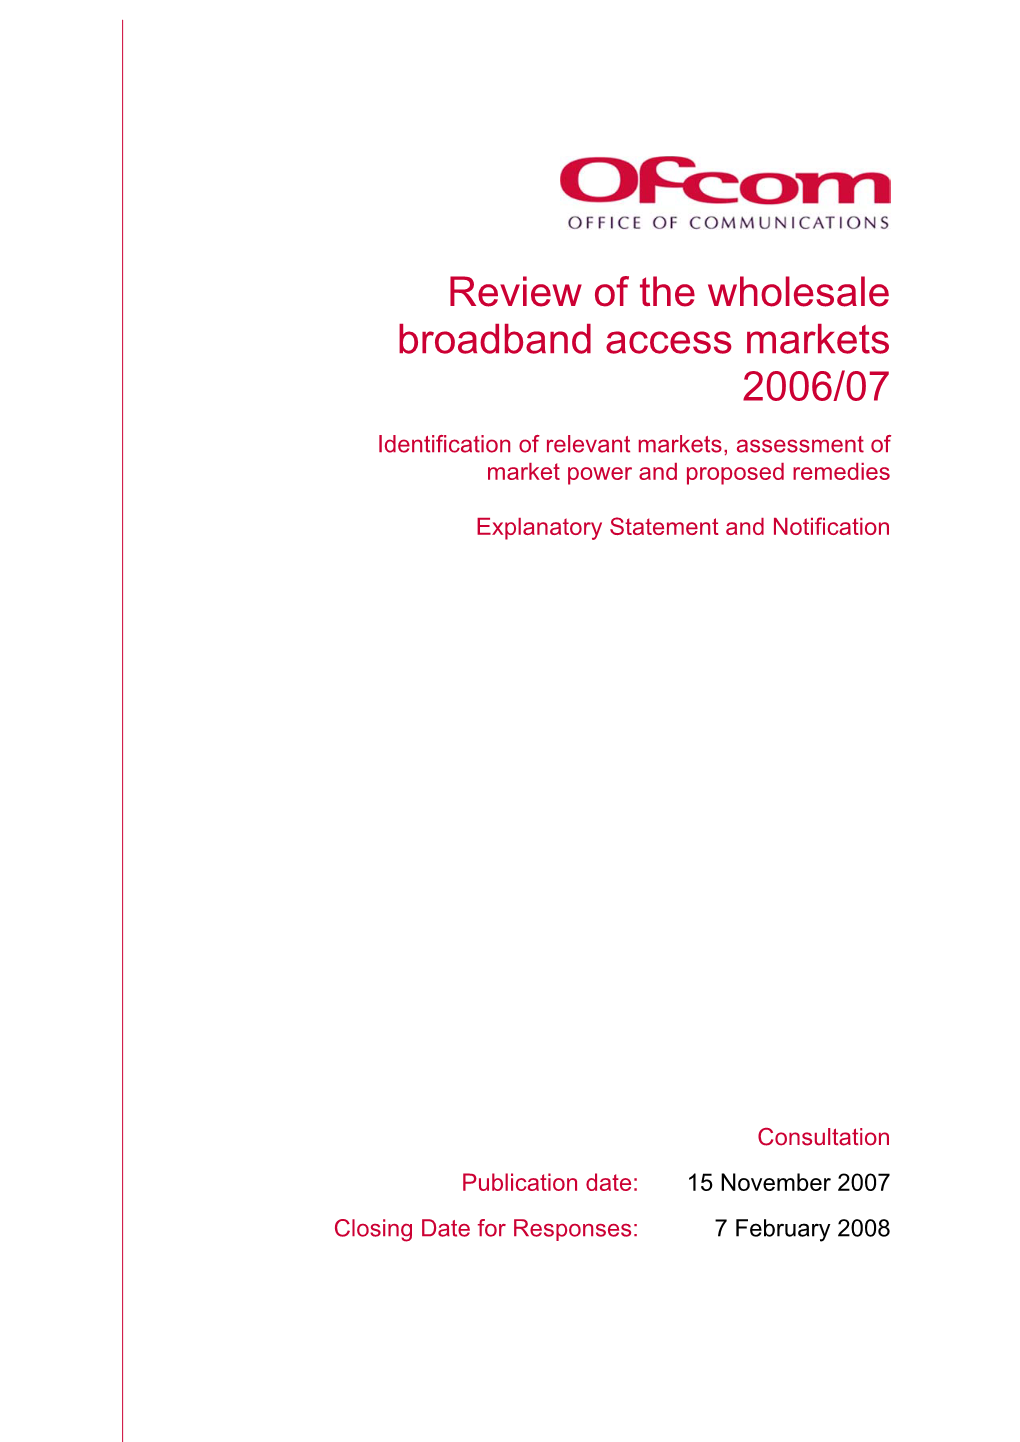 Review of the Wholesale Broadband Access Markets 2006/07